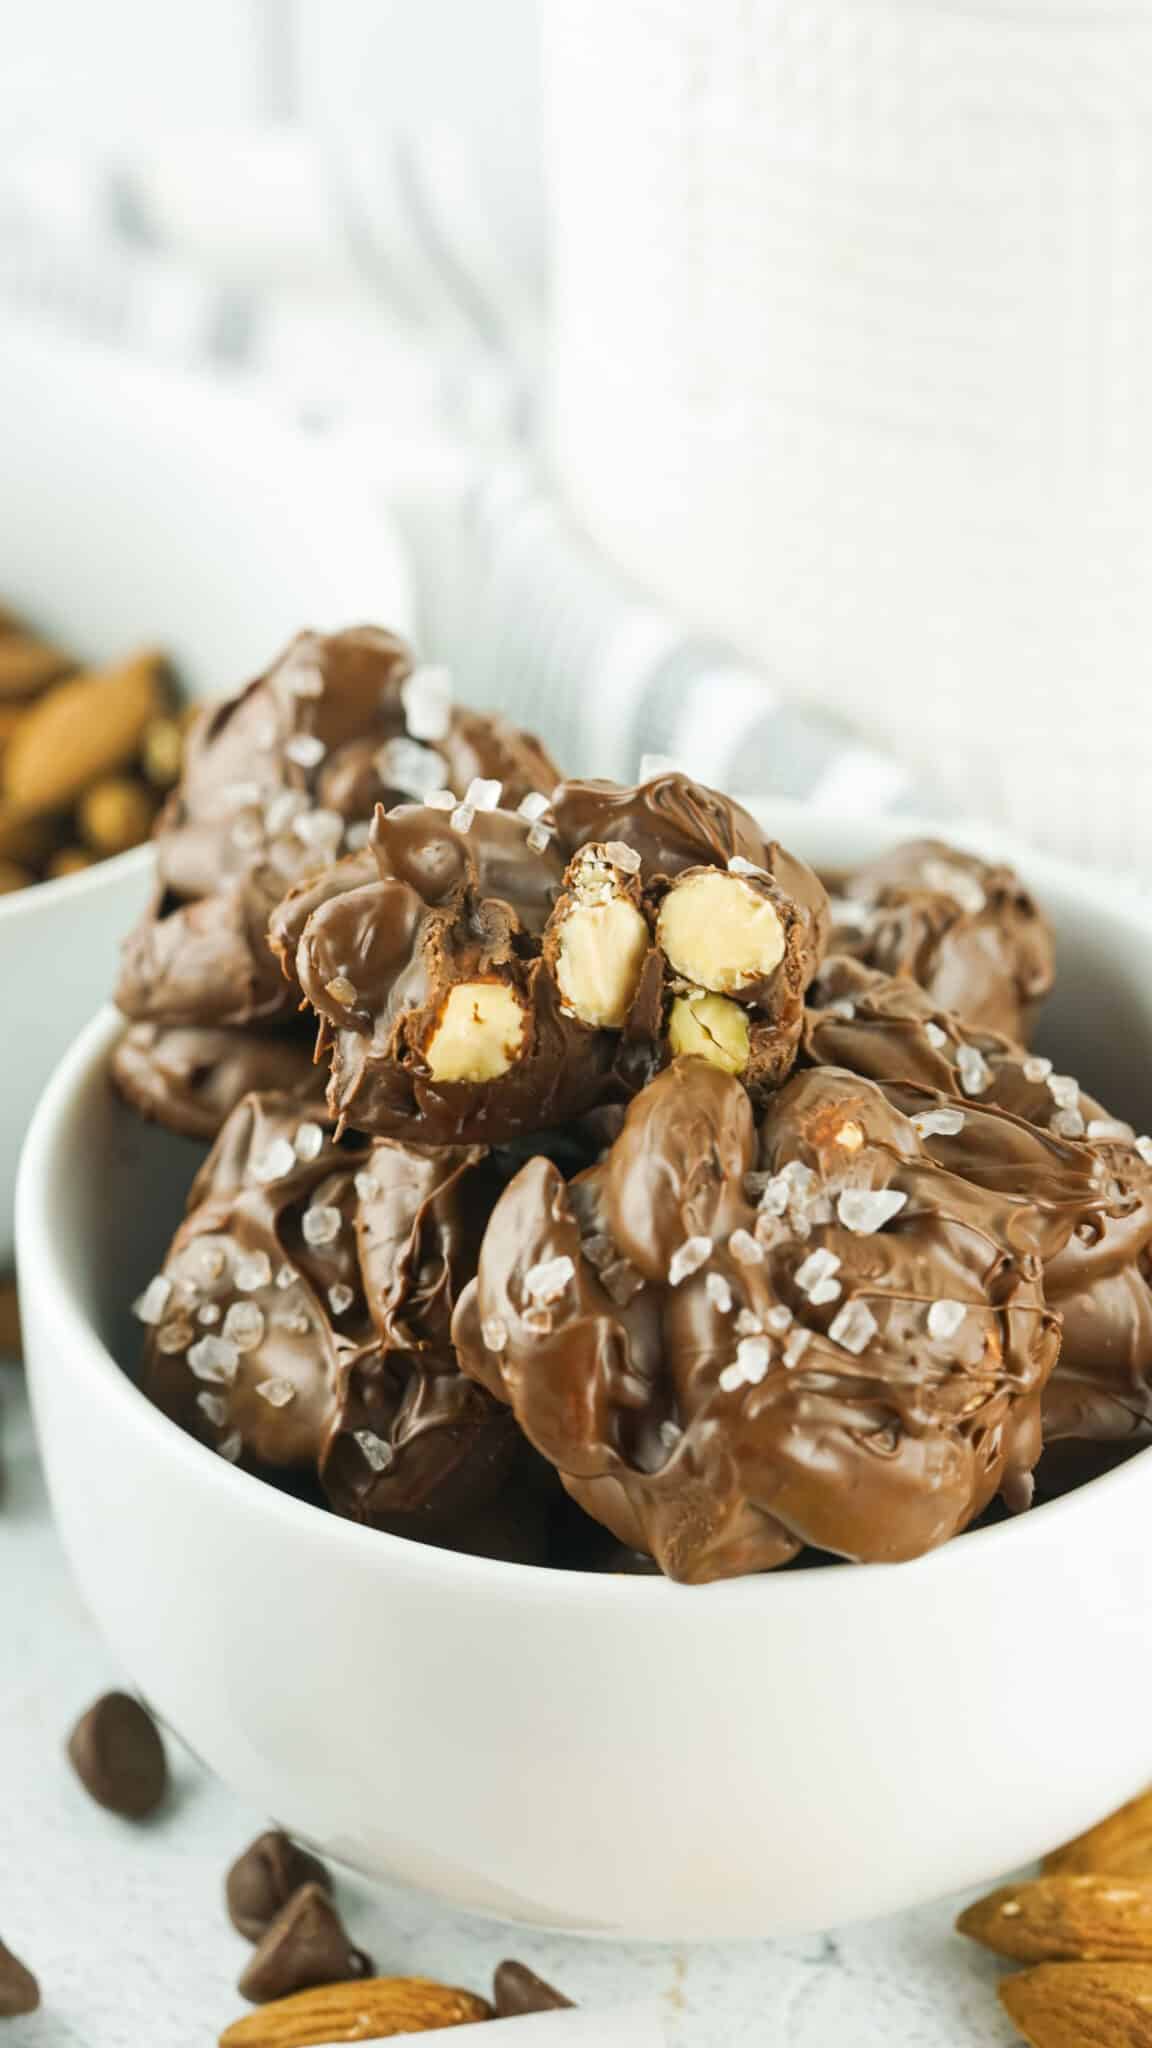 A white bowl containing a stack of chocolate covered almond clusters with one bitten through to show the almonds inside